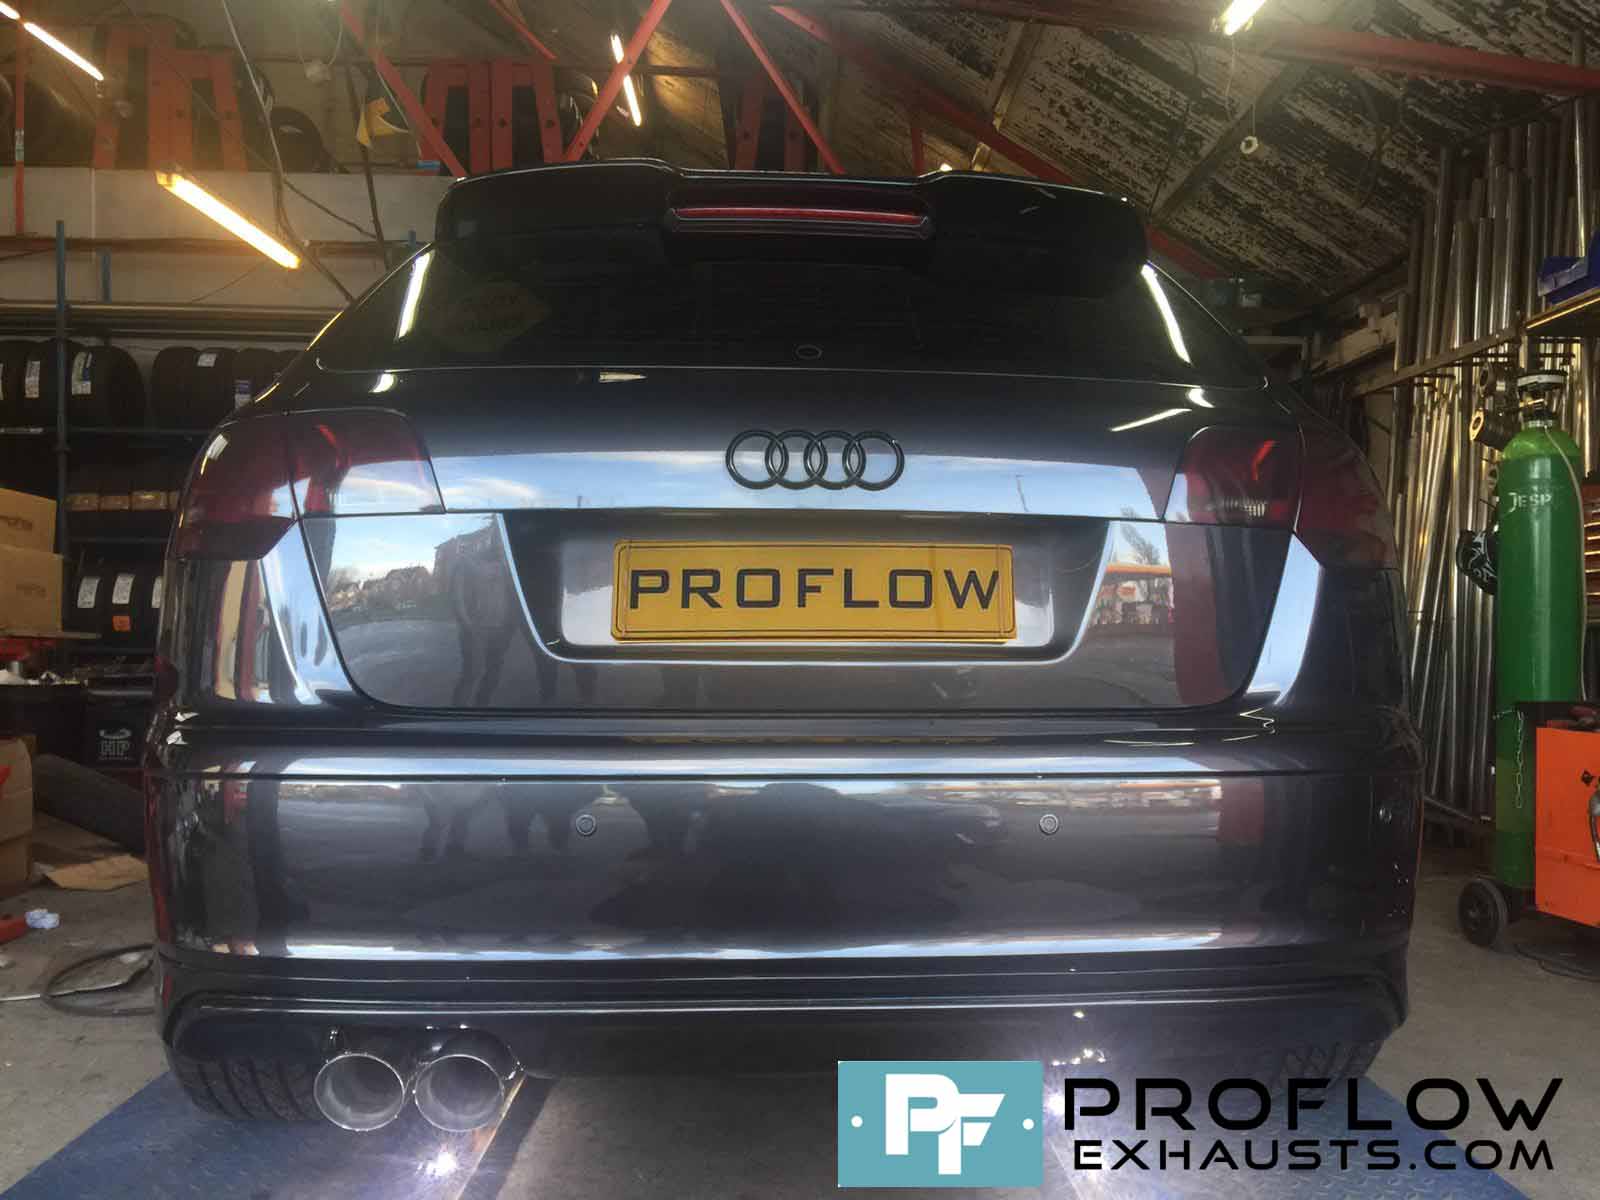 Proflow Exhausts Audi A3 Back-Box Delete Stainless Steel Tailpipe